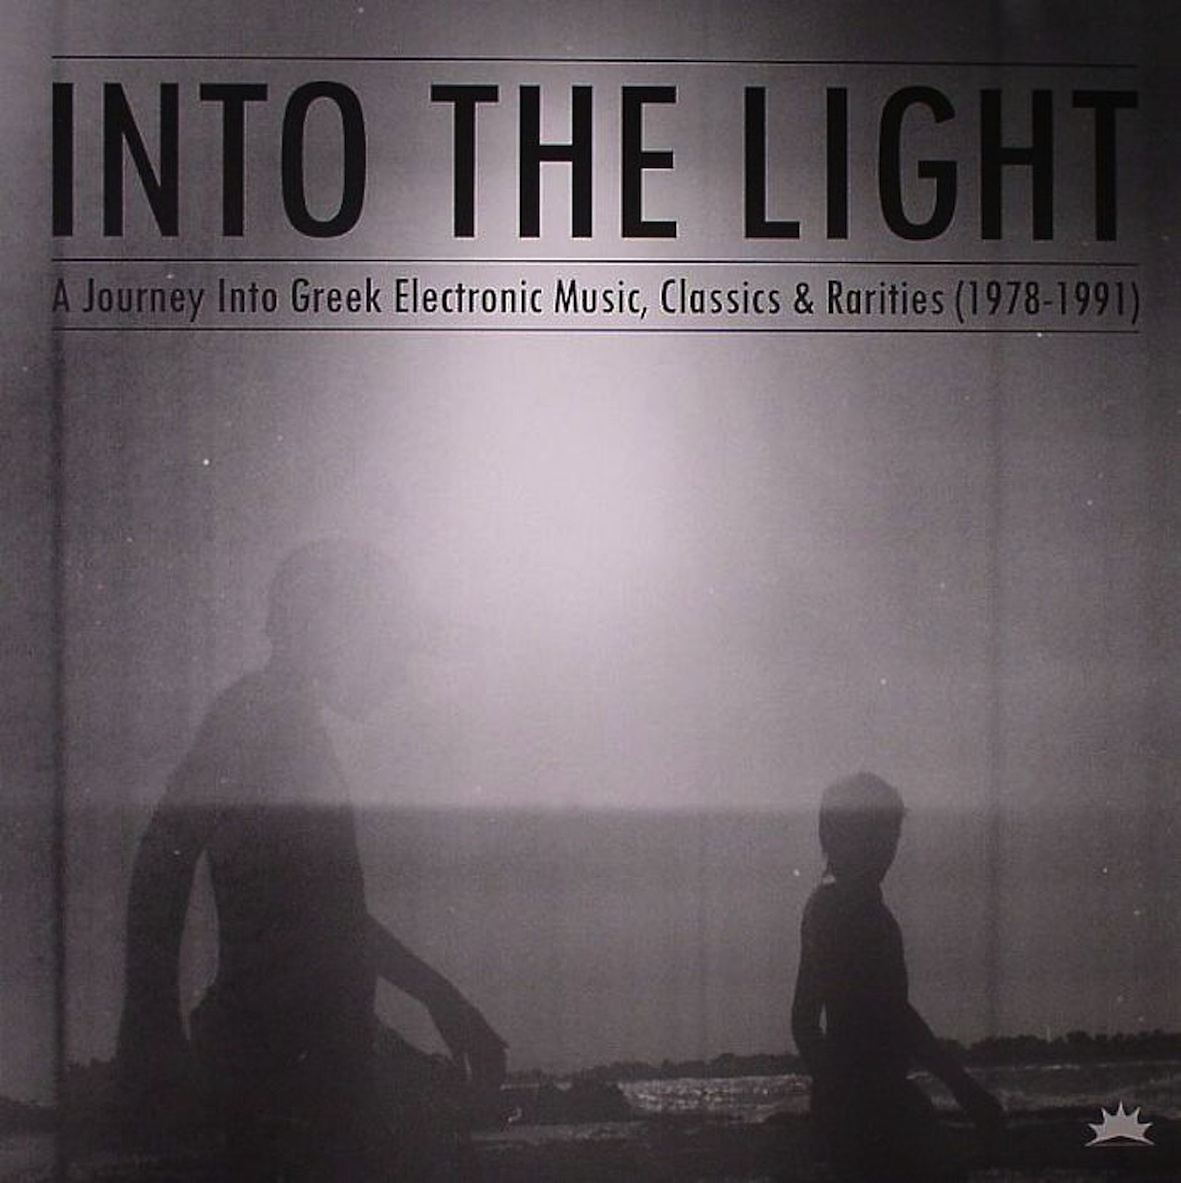 Into The Light: A Journey Into Greek Electronic Music, Classics & Rarities